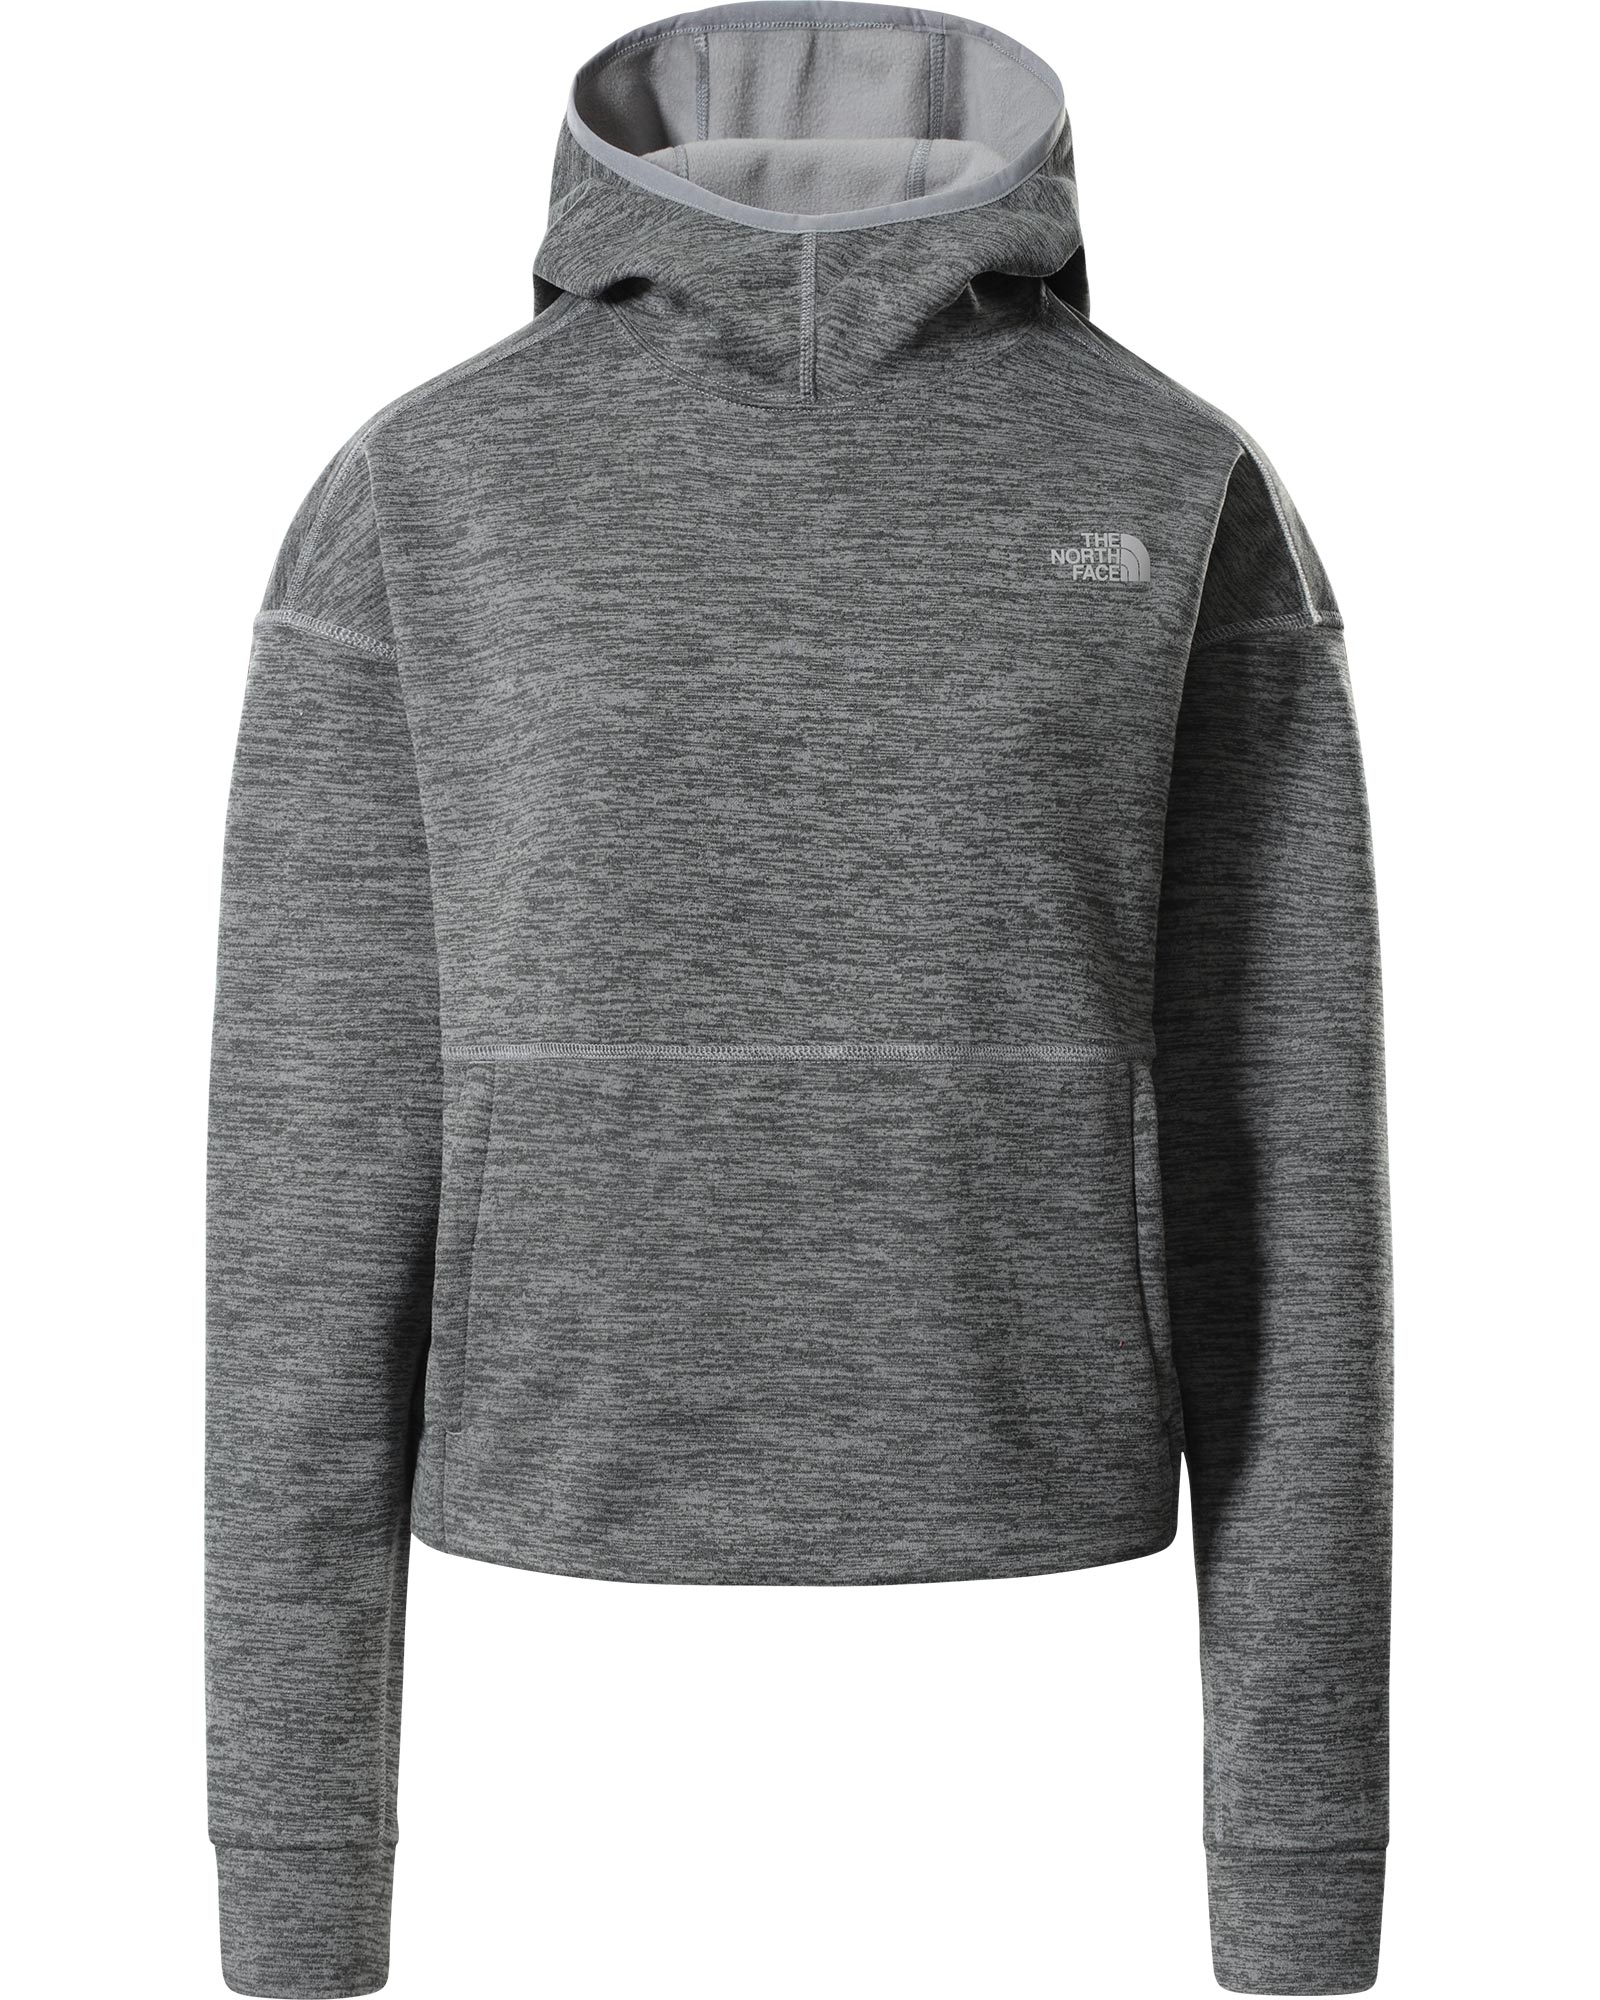 The North Face Canyonlands Women’s Pullover Crop Top - TNF Medium Grey Heather XS